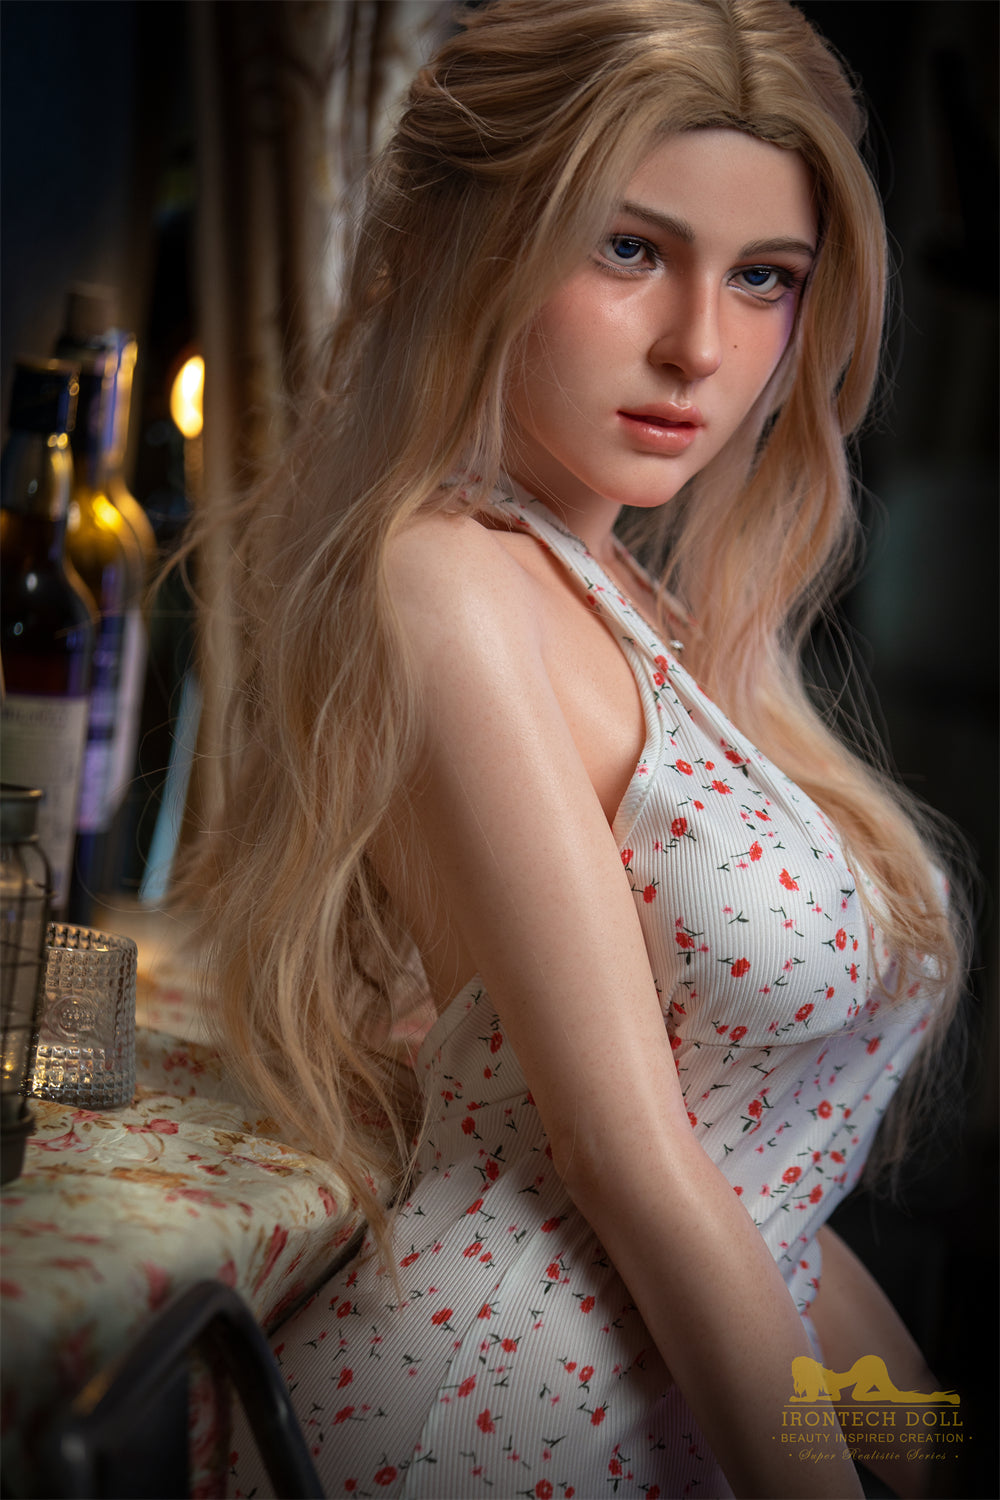 Irontech Doll 153 cm Silicone - Fenny | Buy Sex Dolls at DOLLS ACTUALLY